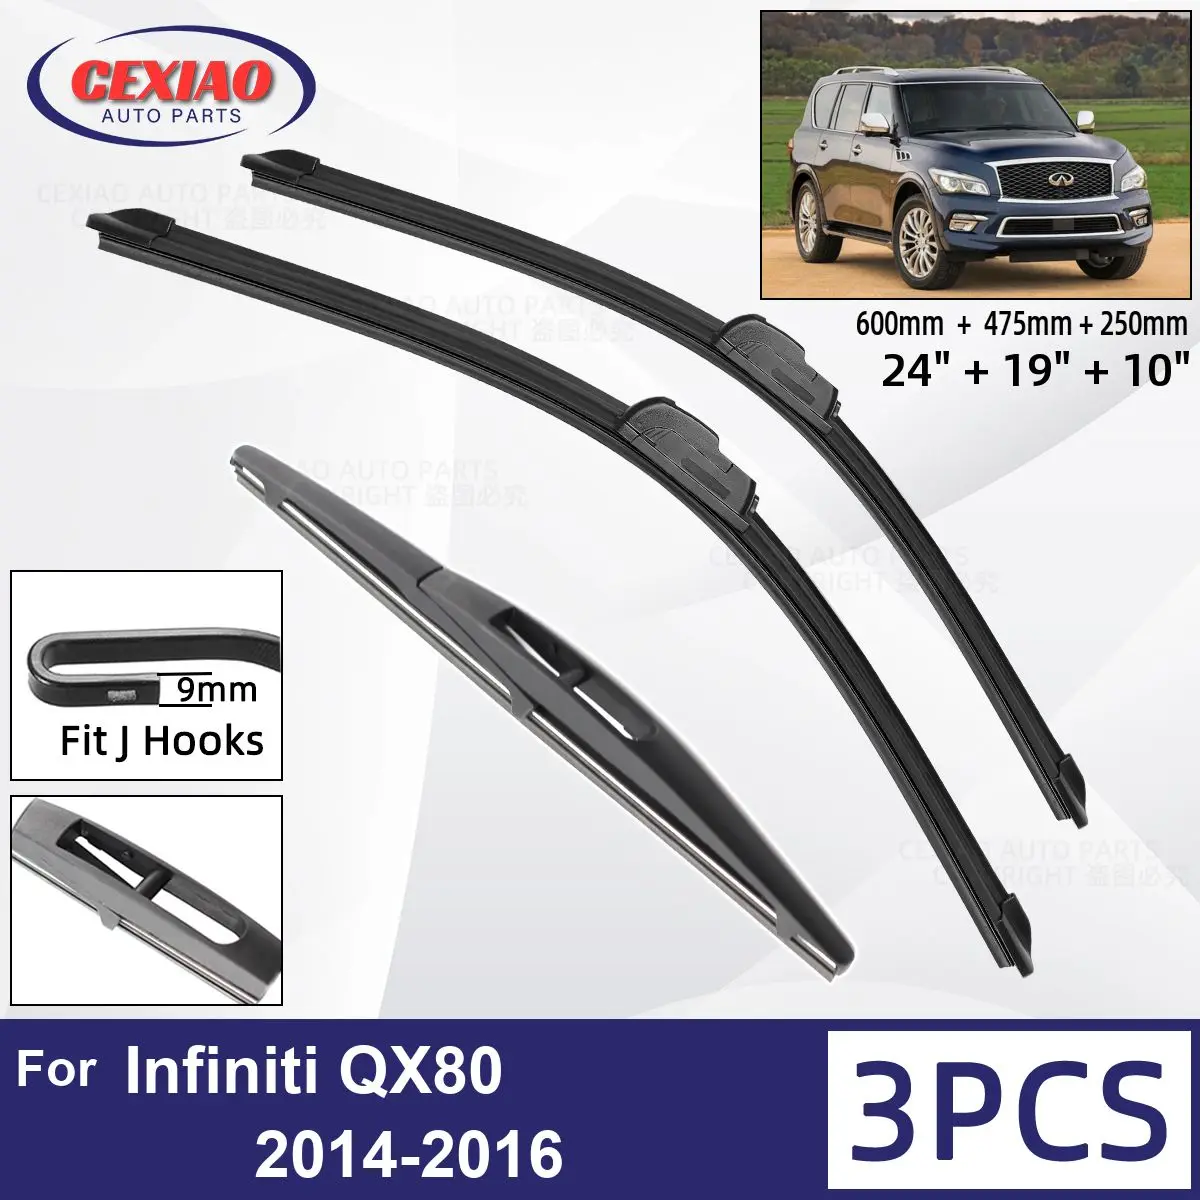 

For Infiniti QX80 2014-2016 Car Front Rear Wiper Blades Soft Rubber Windscreen Wipers Auto Windshield 24"+19"+10" 2014 2015 2016